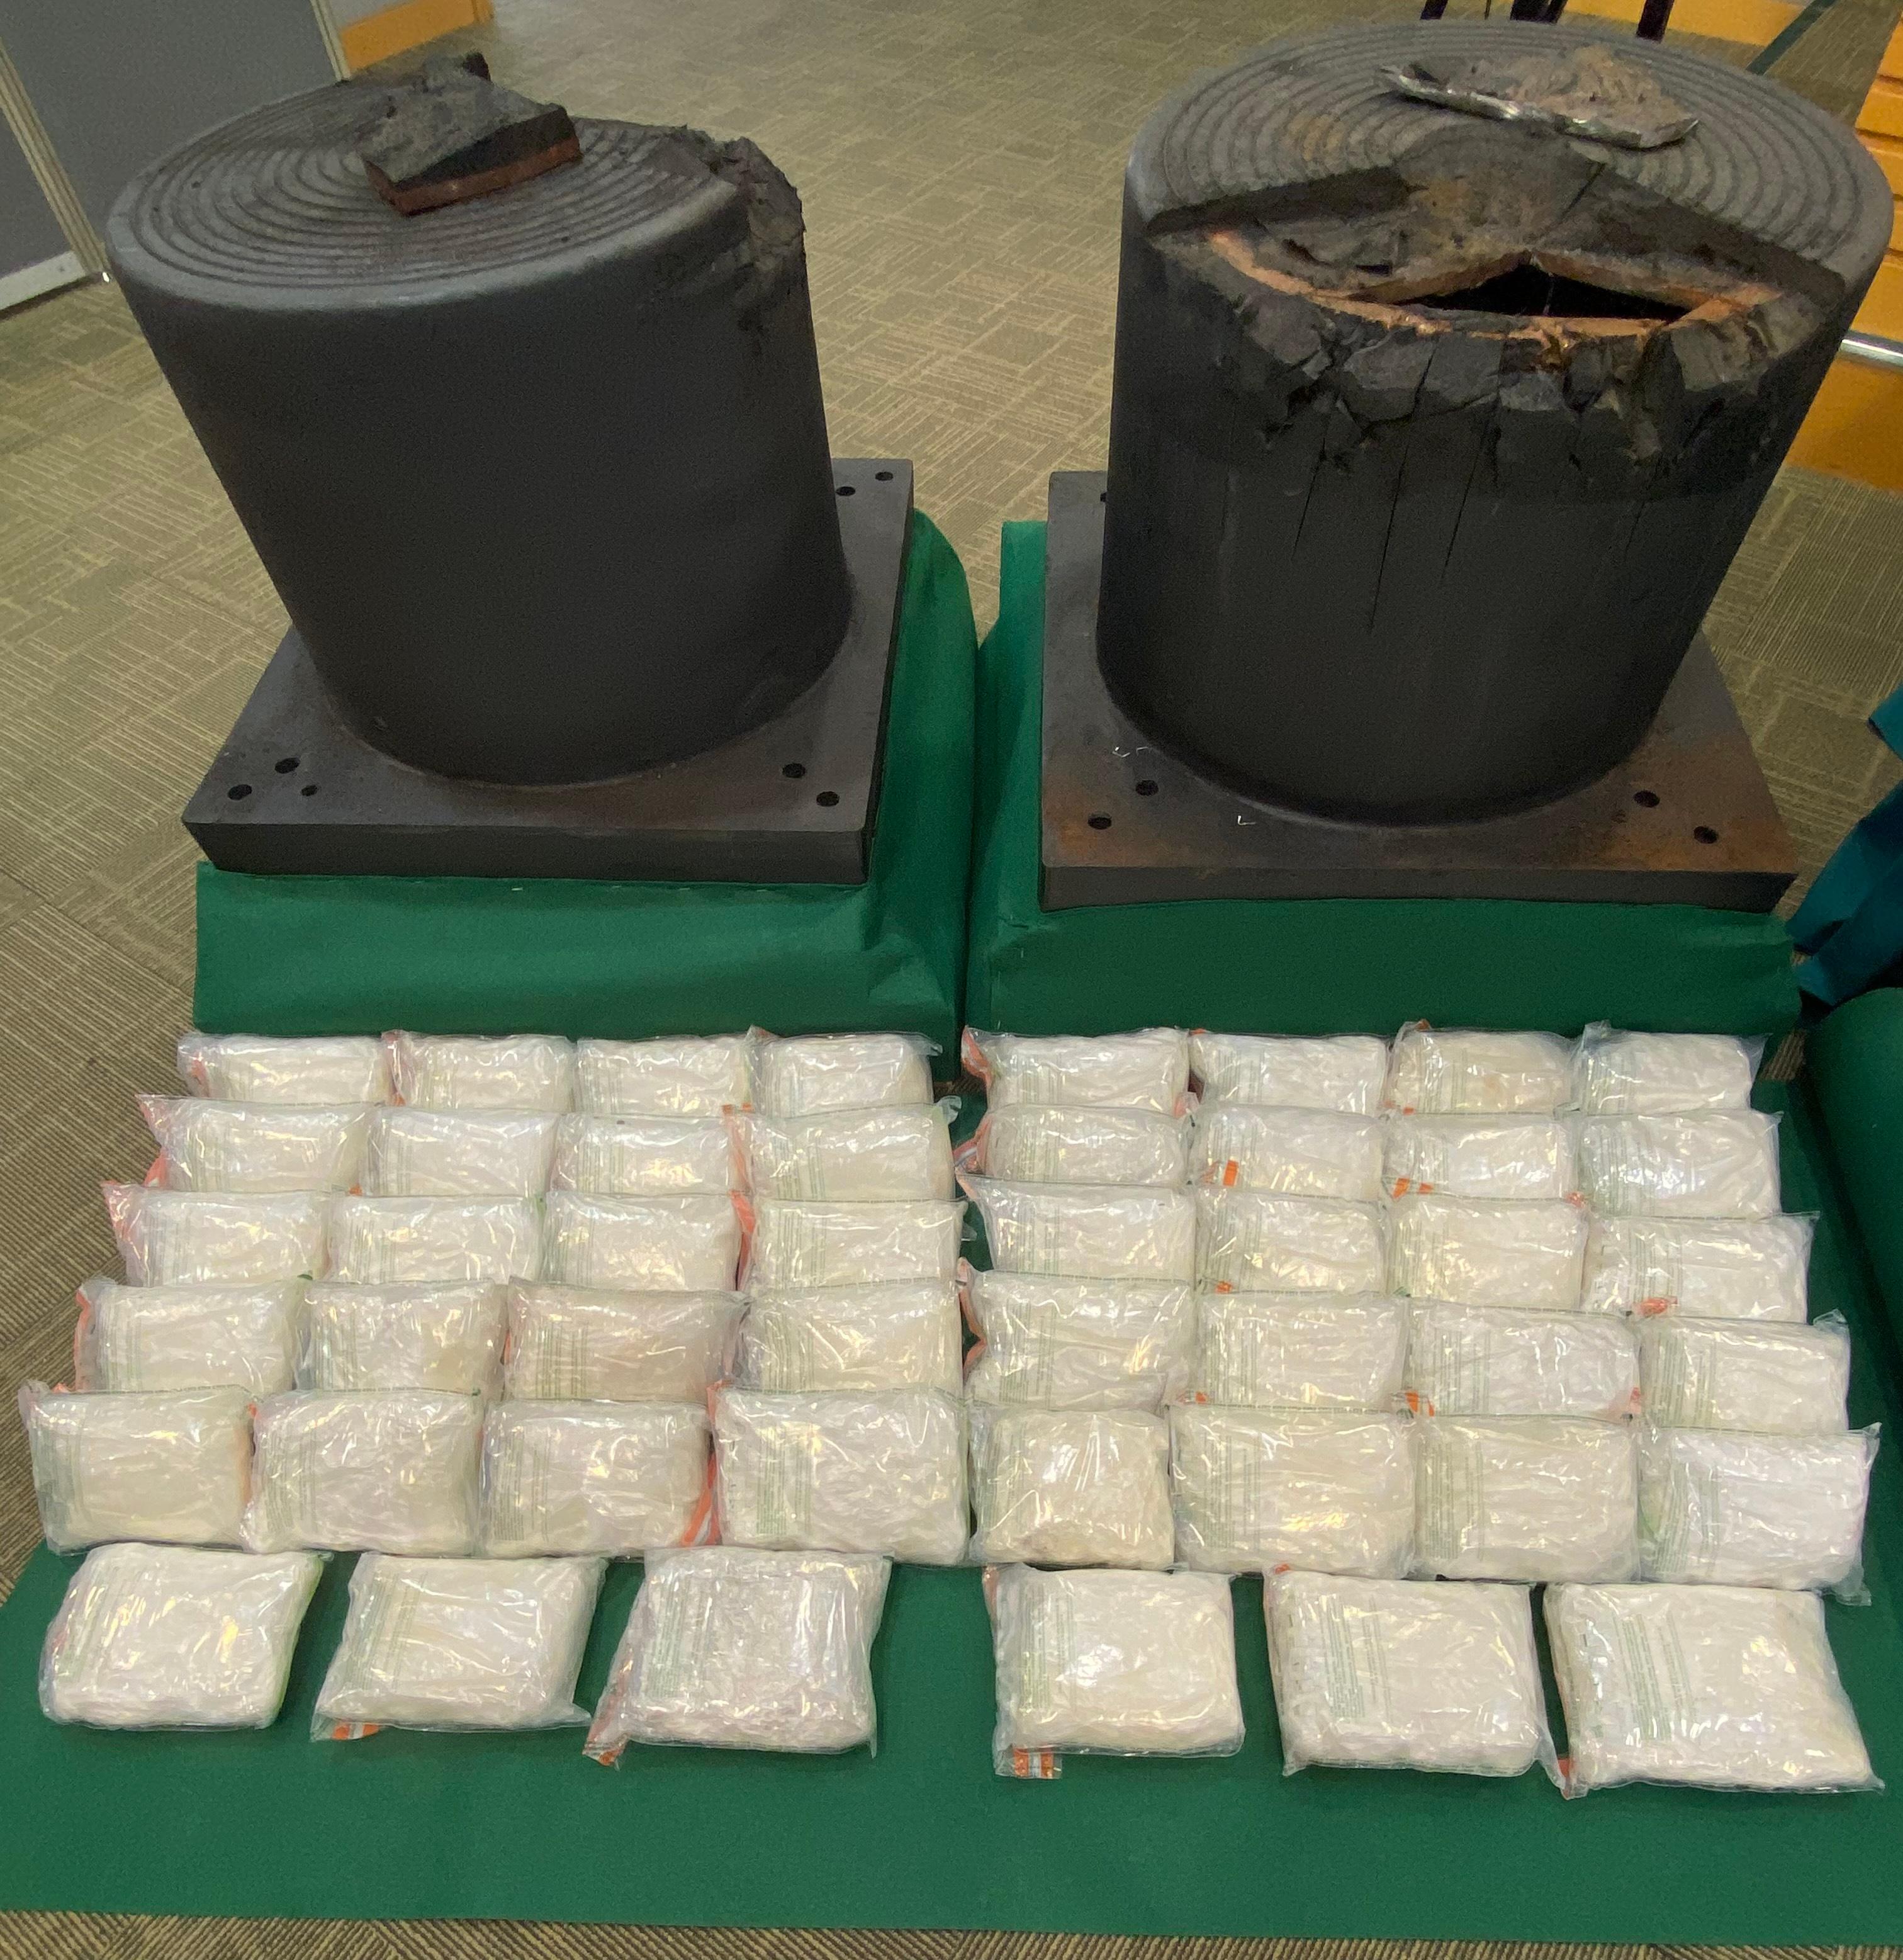 Hong Kong Customs jointly mounted an anti-narcotics operation, codenamed "Yunzhan-duanliu", with the anti-smuggling departments of the Mainland Customs in March. Hong Kong Customs seized about 700 kilograms of suspected methamphetamine with an estimated market value of $400 million in the operation. Picture shows the industrial-use anti-vibratory rubber and the suspected methamphetamine seized from them.